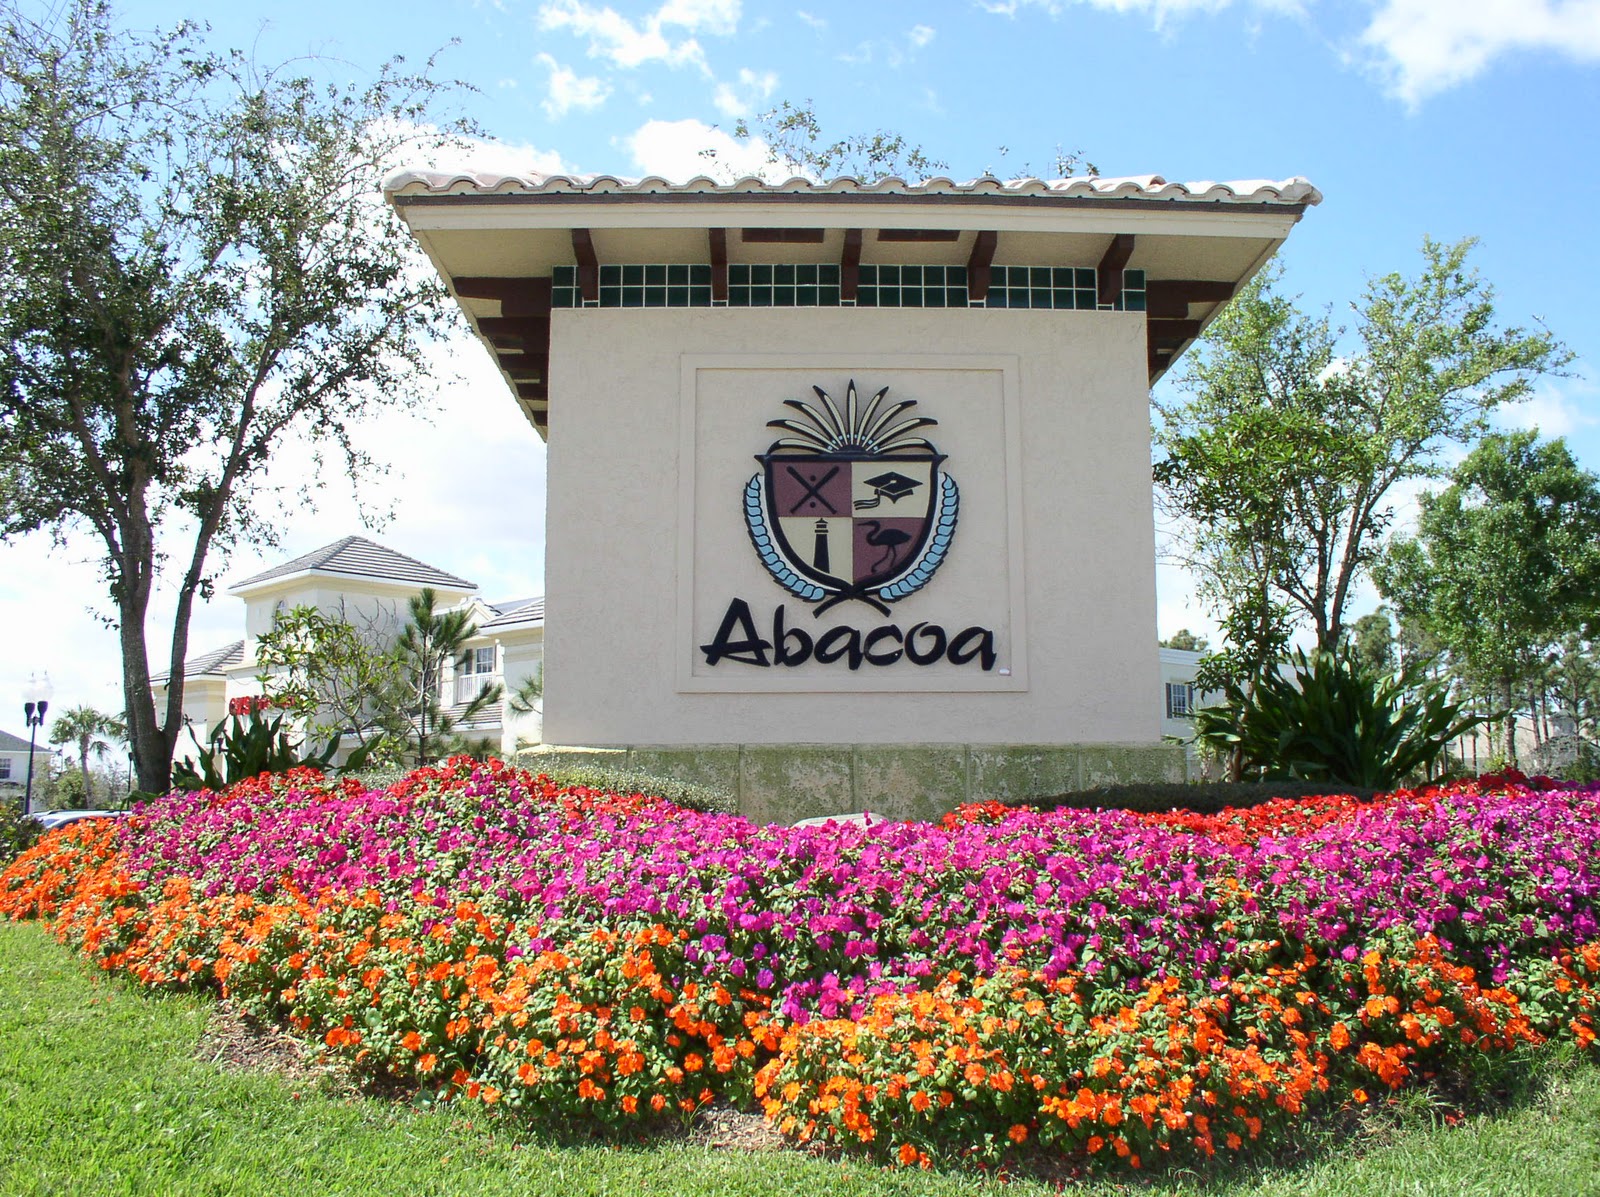 Abacoa foreclosures in Jupiter